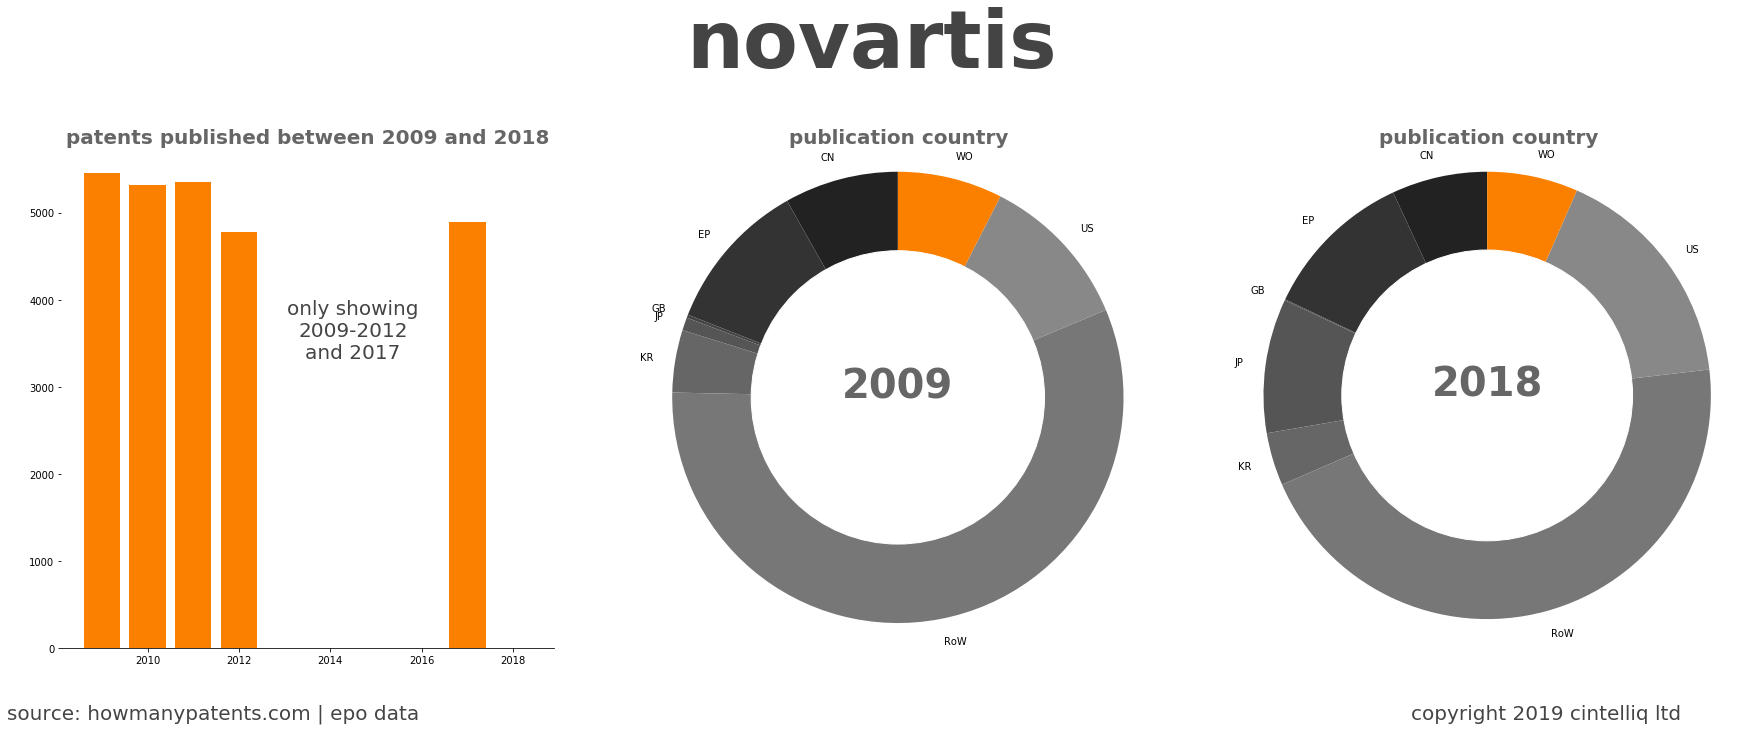 summary of patents for Novartis